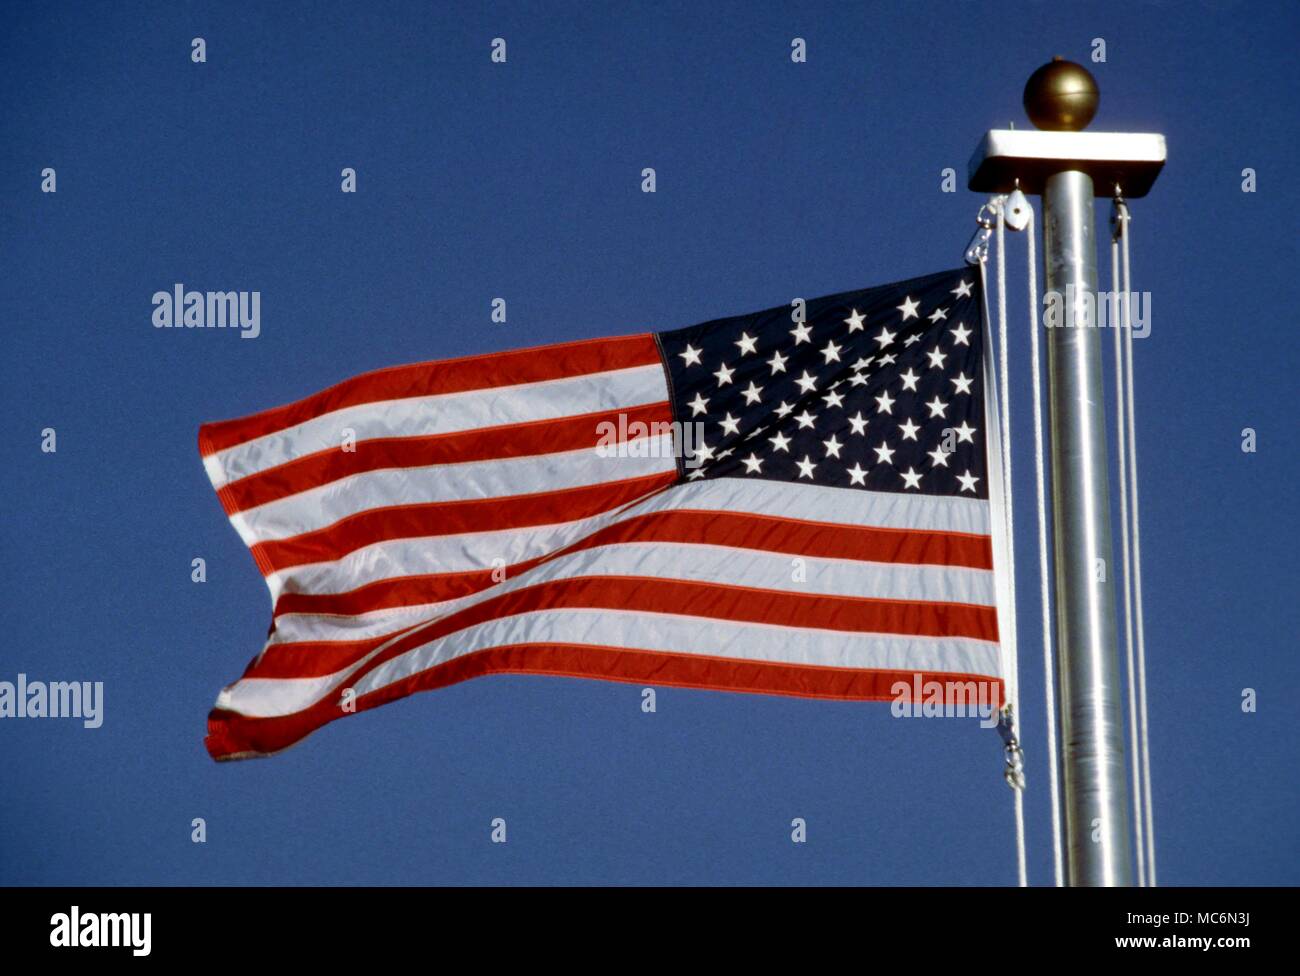 Flags The Stars and Stripes of the United States. Stock Photo